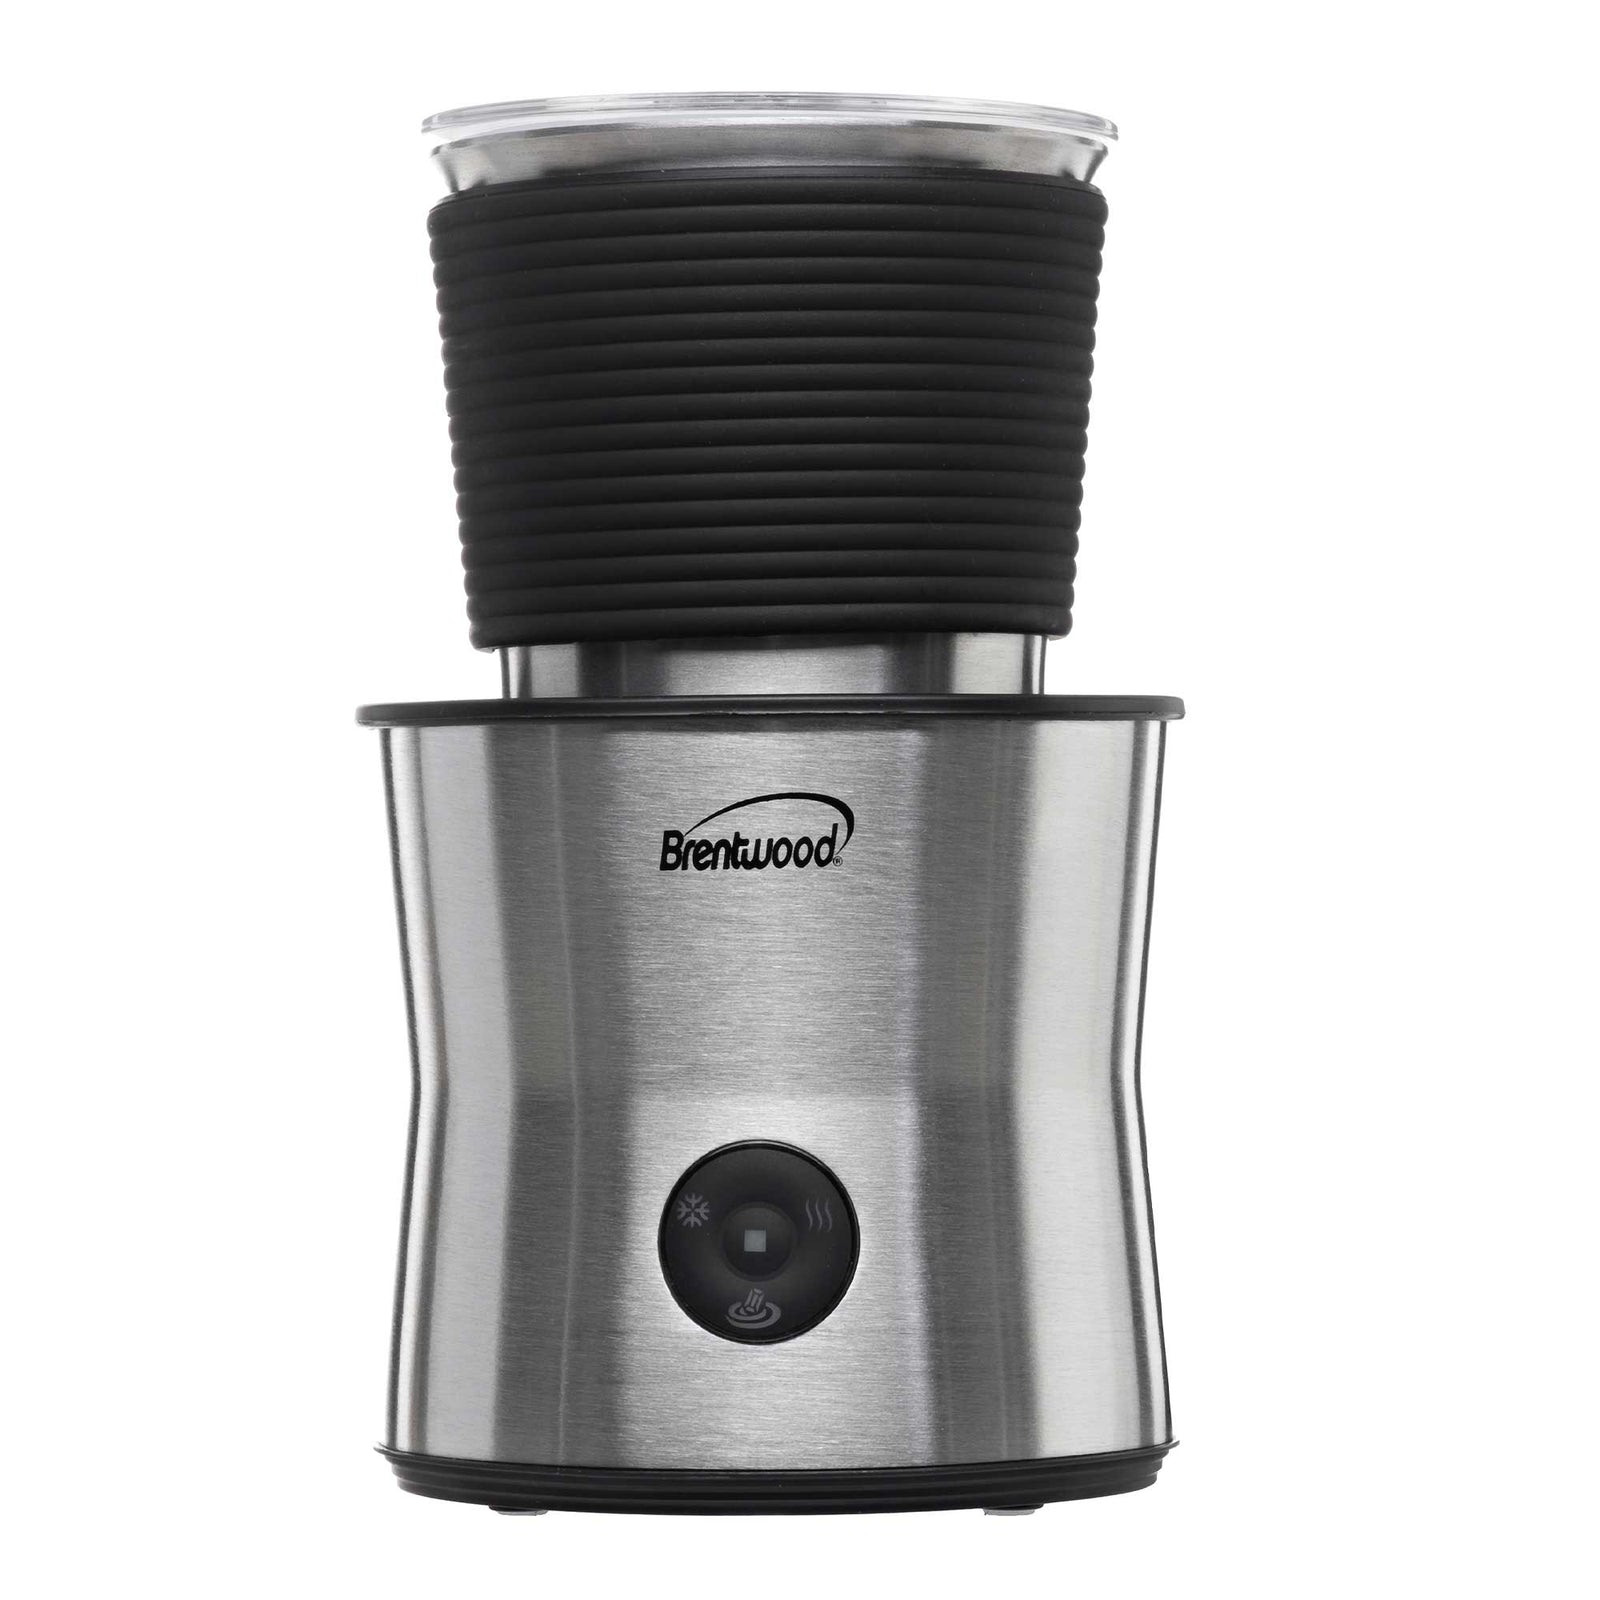 Milk Frothers & Heaters - Brentwood Appliances